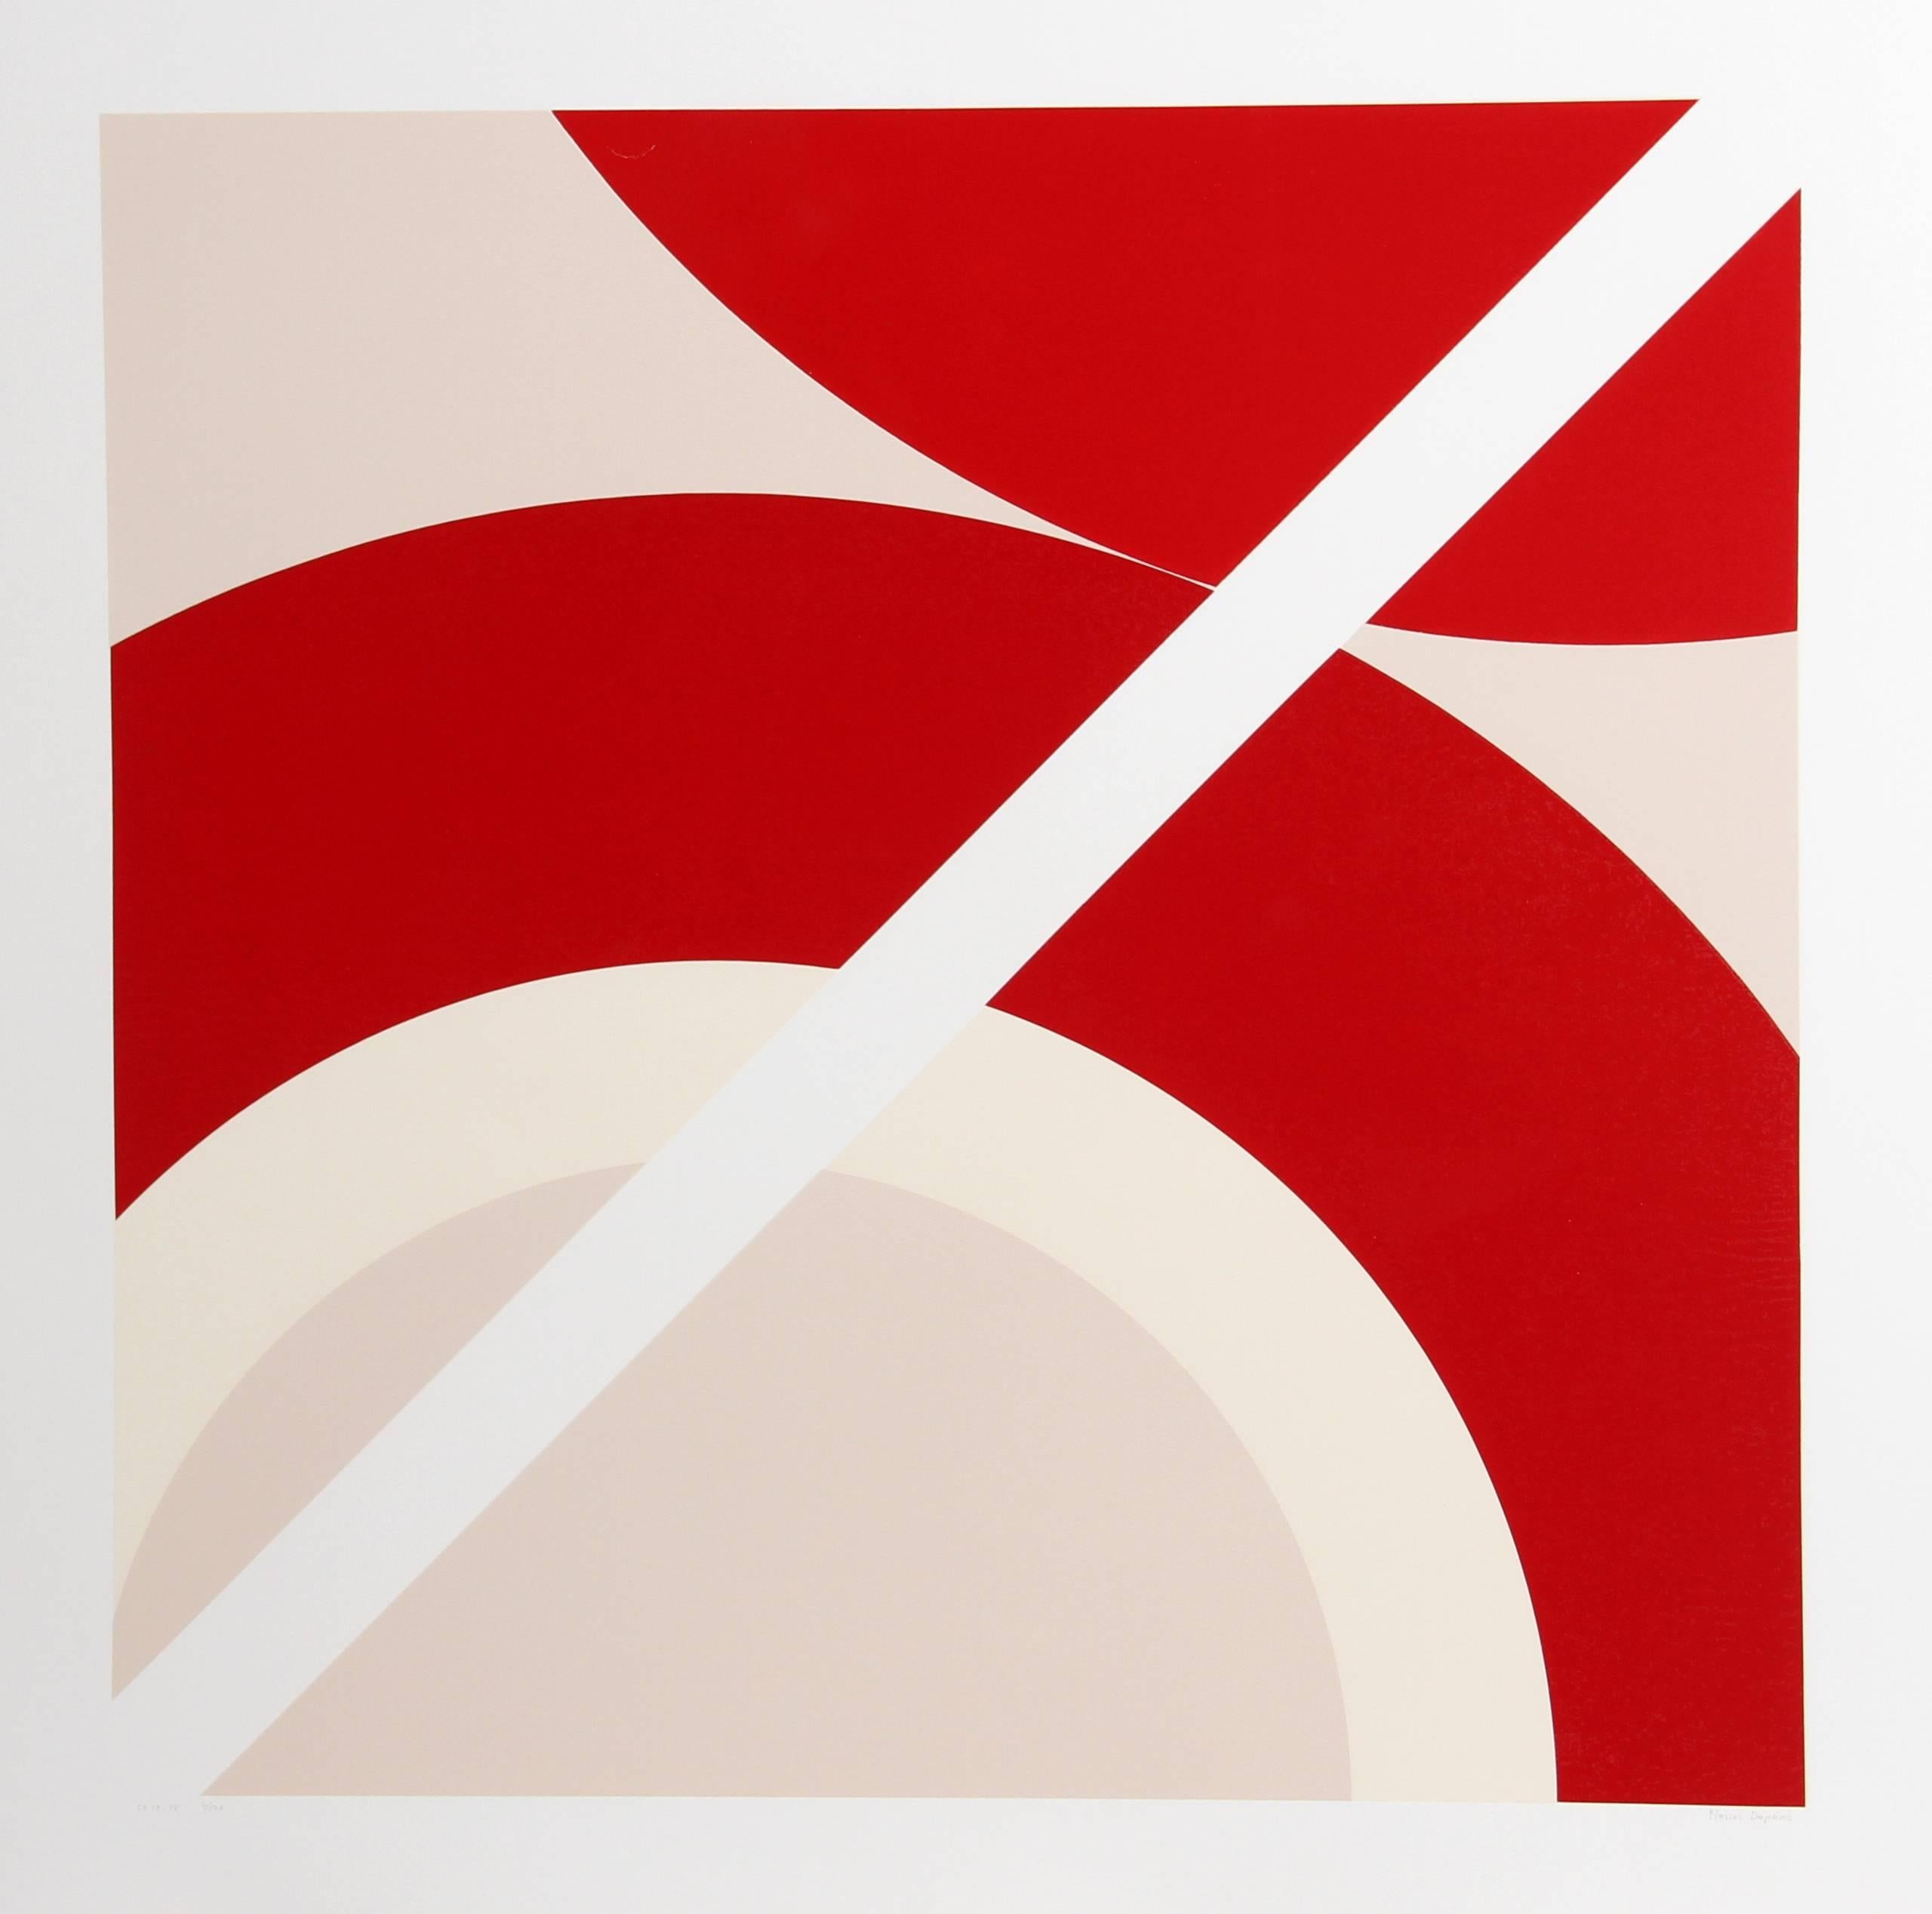 Artist:  Nassos Daphnis, Greek (1914 - 2010)
Title:  SS 17-78
Year:  1978
Medium:  Silkscreen, Signed and numbered in pencil
Edition:  120, AP 25
Image: 27 x 27 inches
Size:  35 in. x 35 in. (88.9 cm x 88.9 cm)